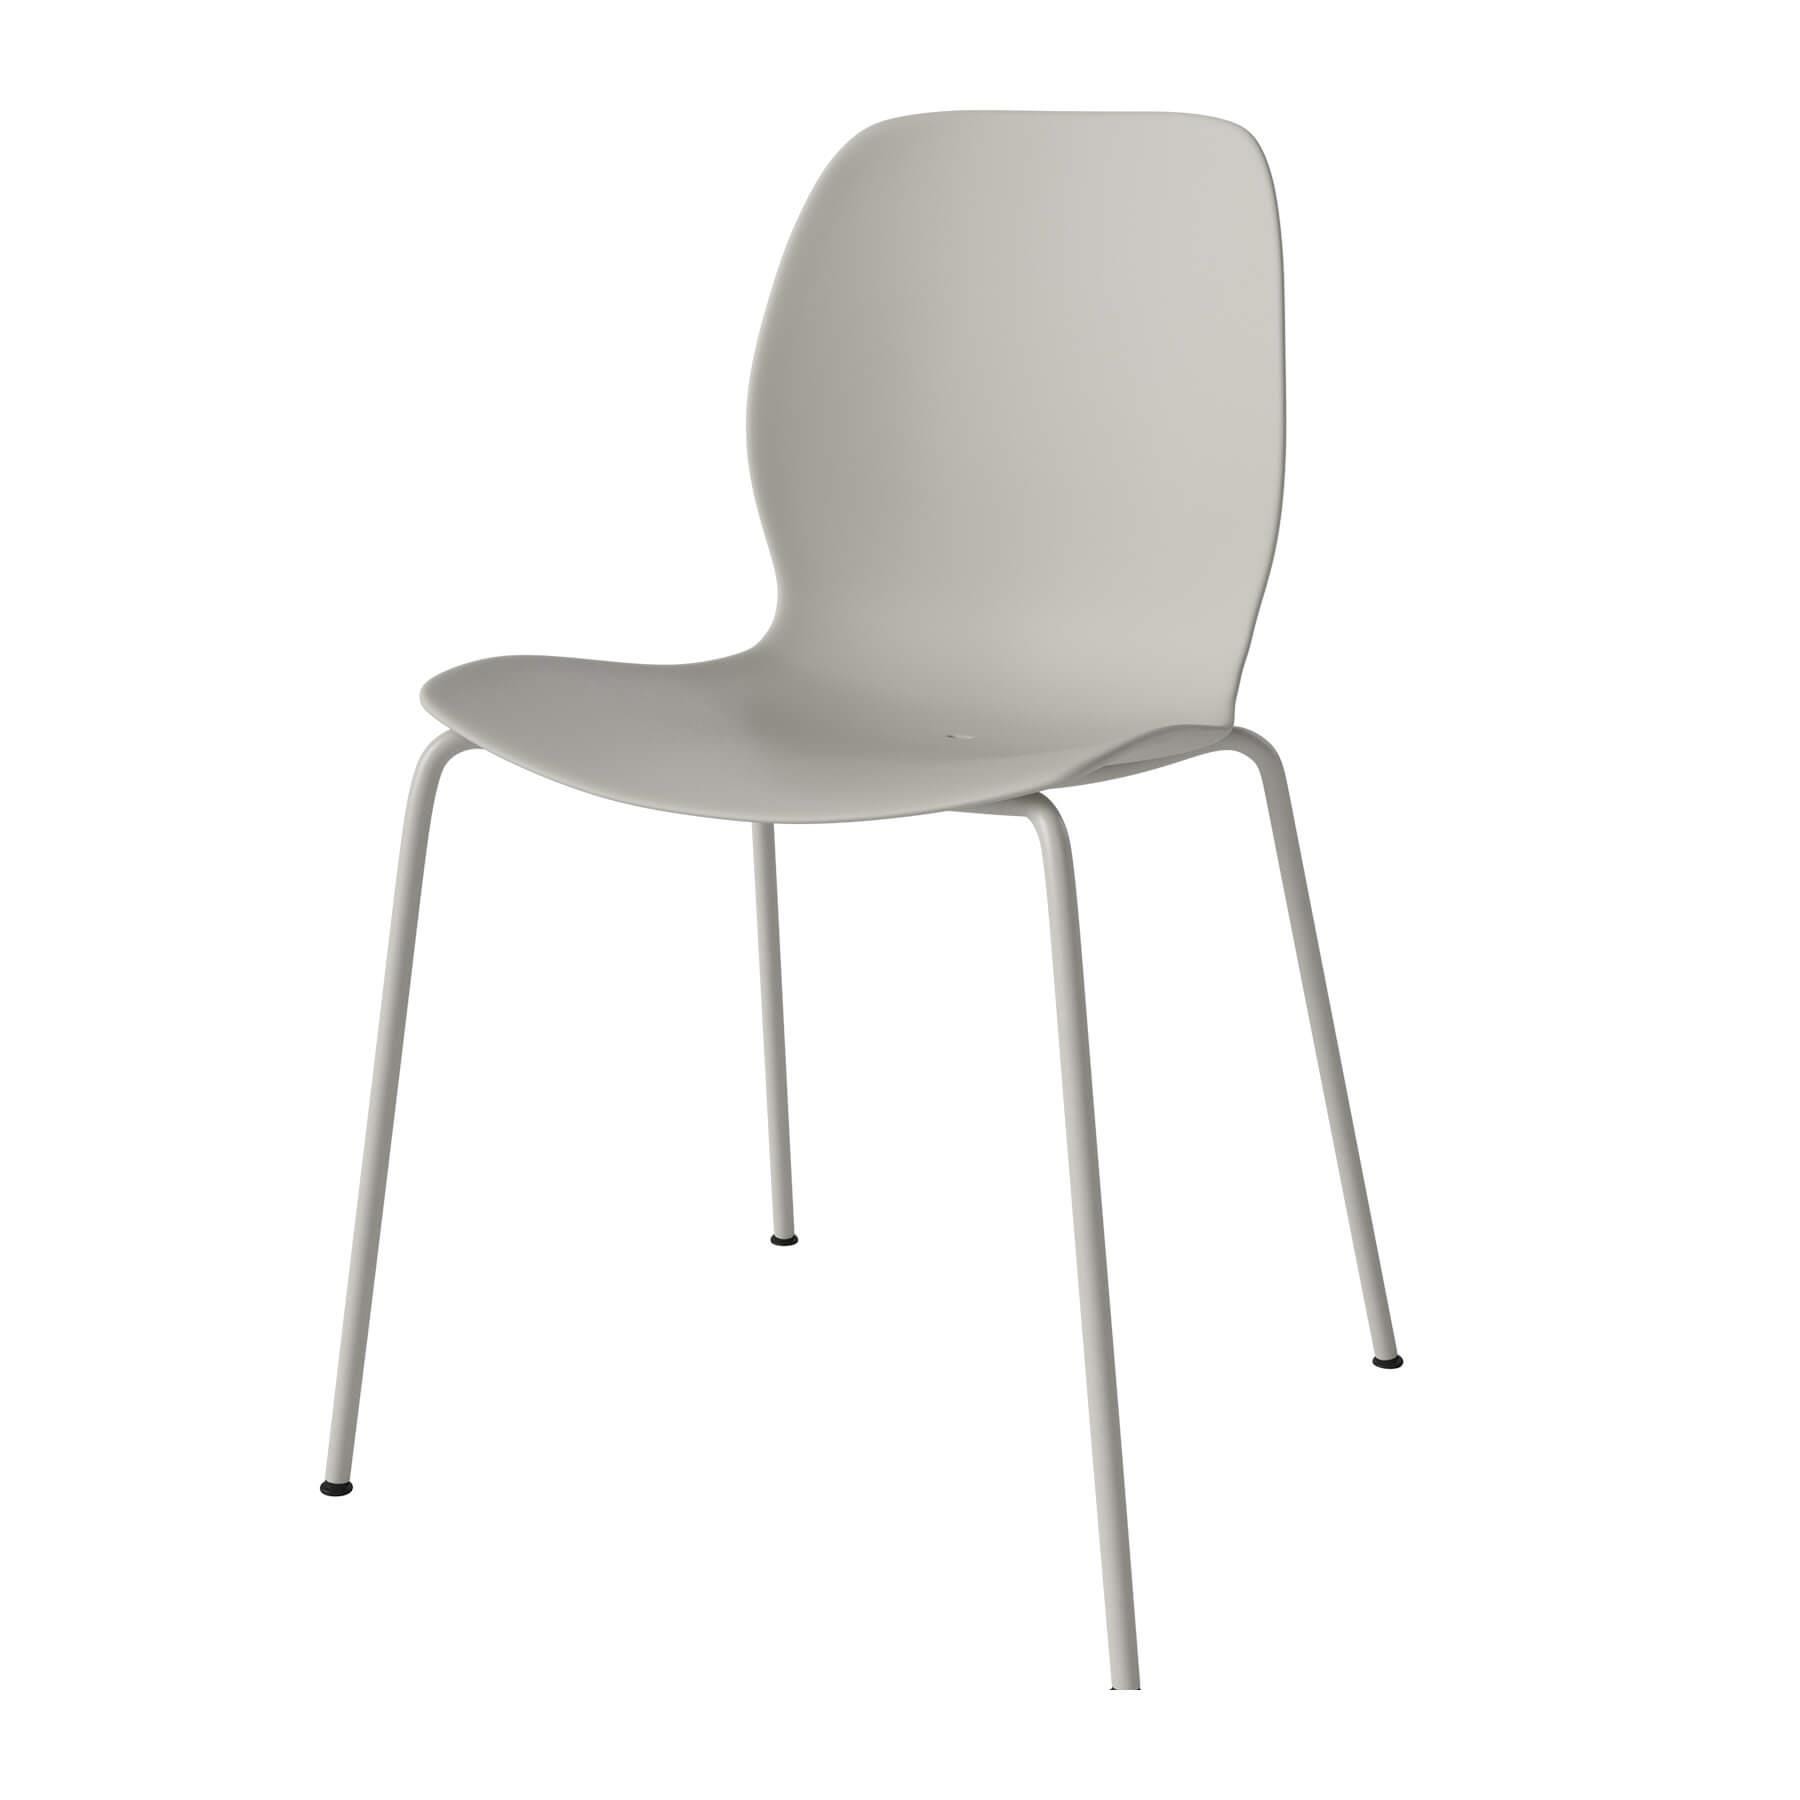 Bolia Seed Garden Chair Grey Designer Furniture From Holloways Of Ludlow